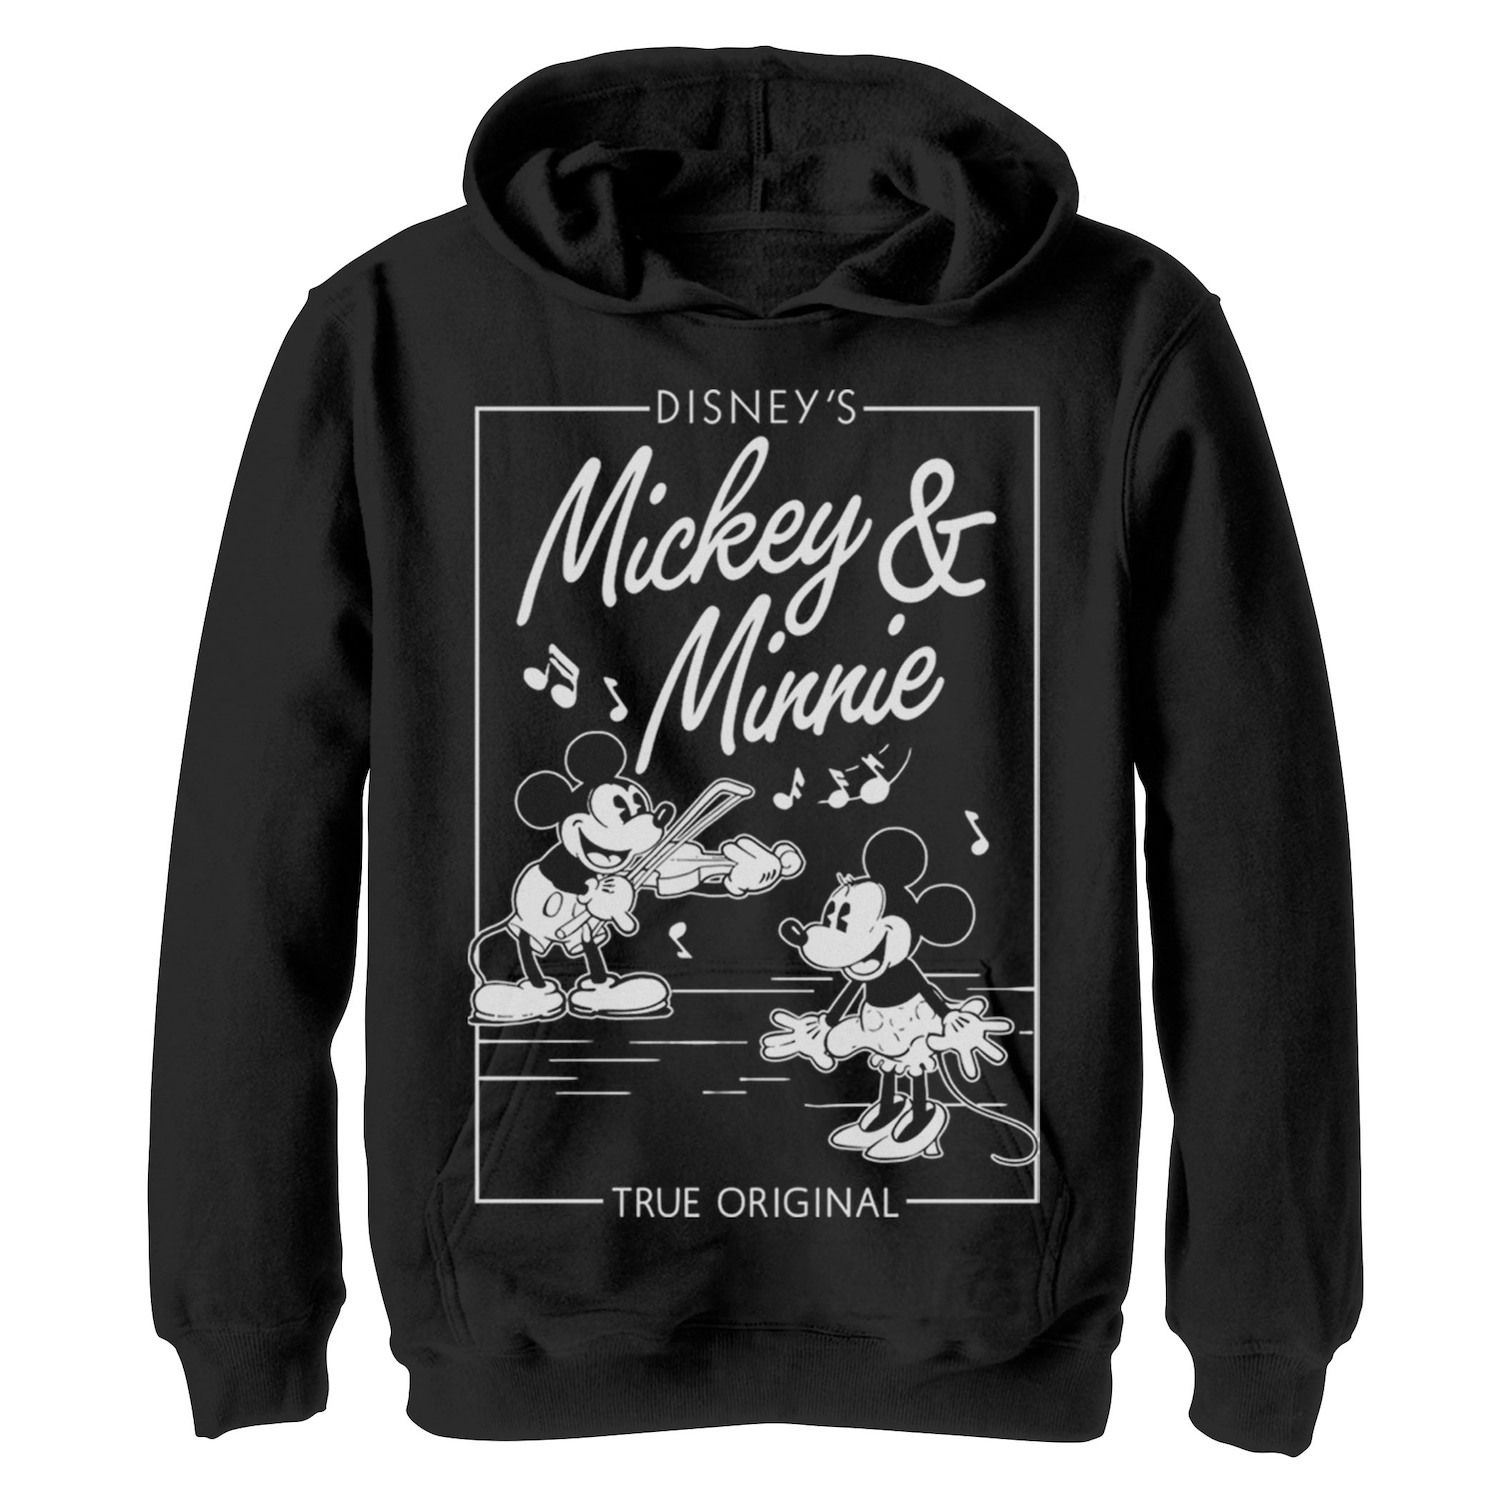 Image for Disney s Mickey Mouse Boys 8-20 & Minnie Mouse Vintage Comic Pullover Graphic Hoodie at Kohl's.